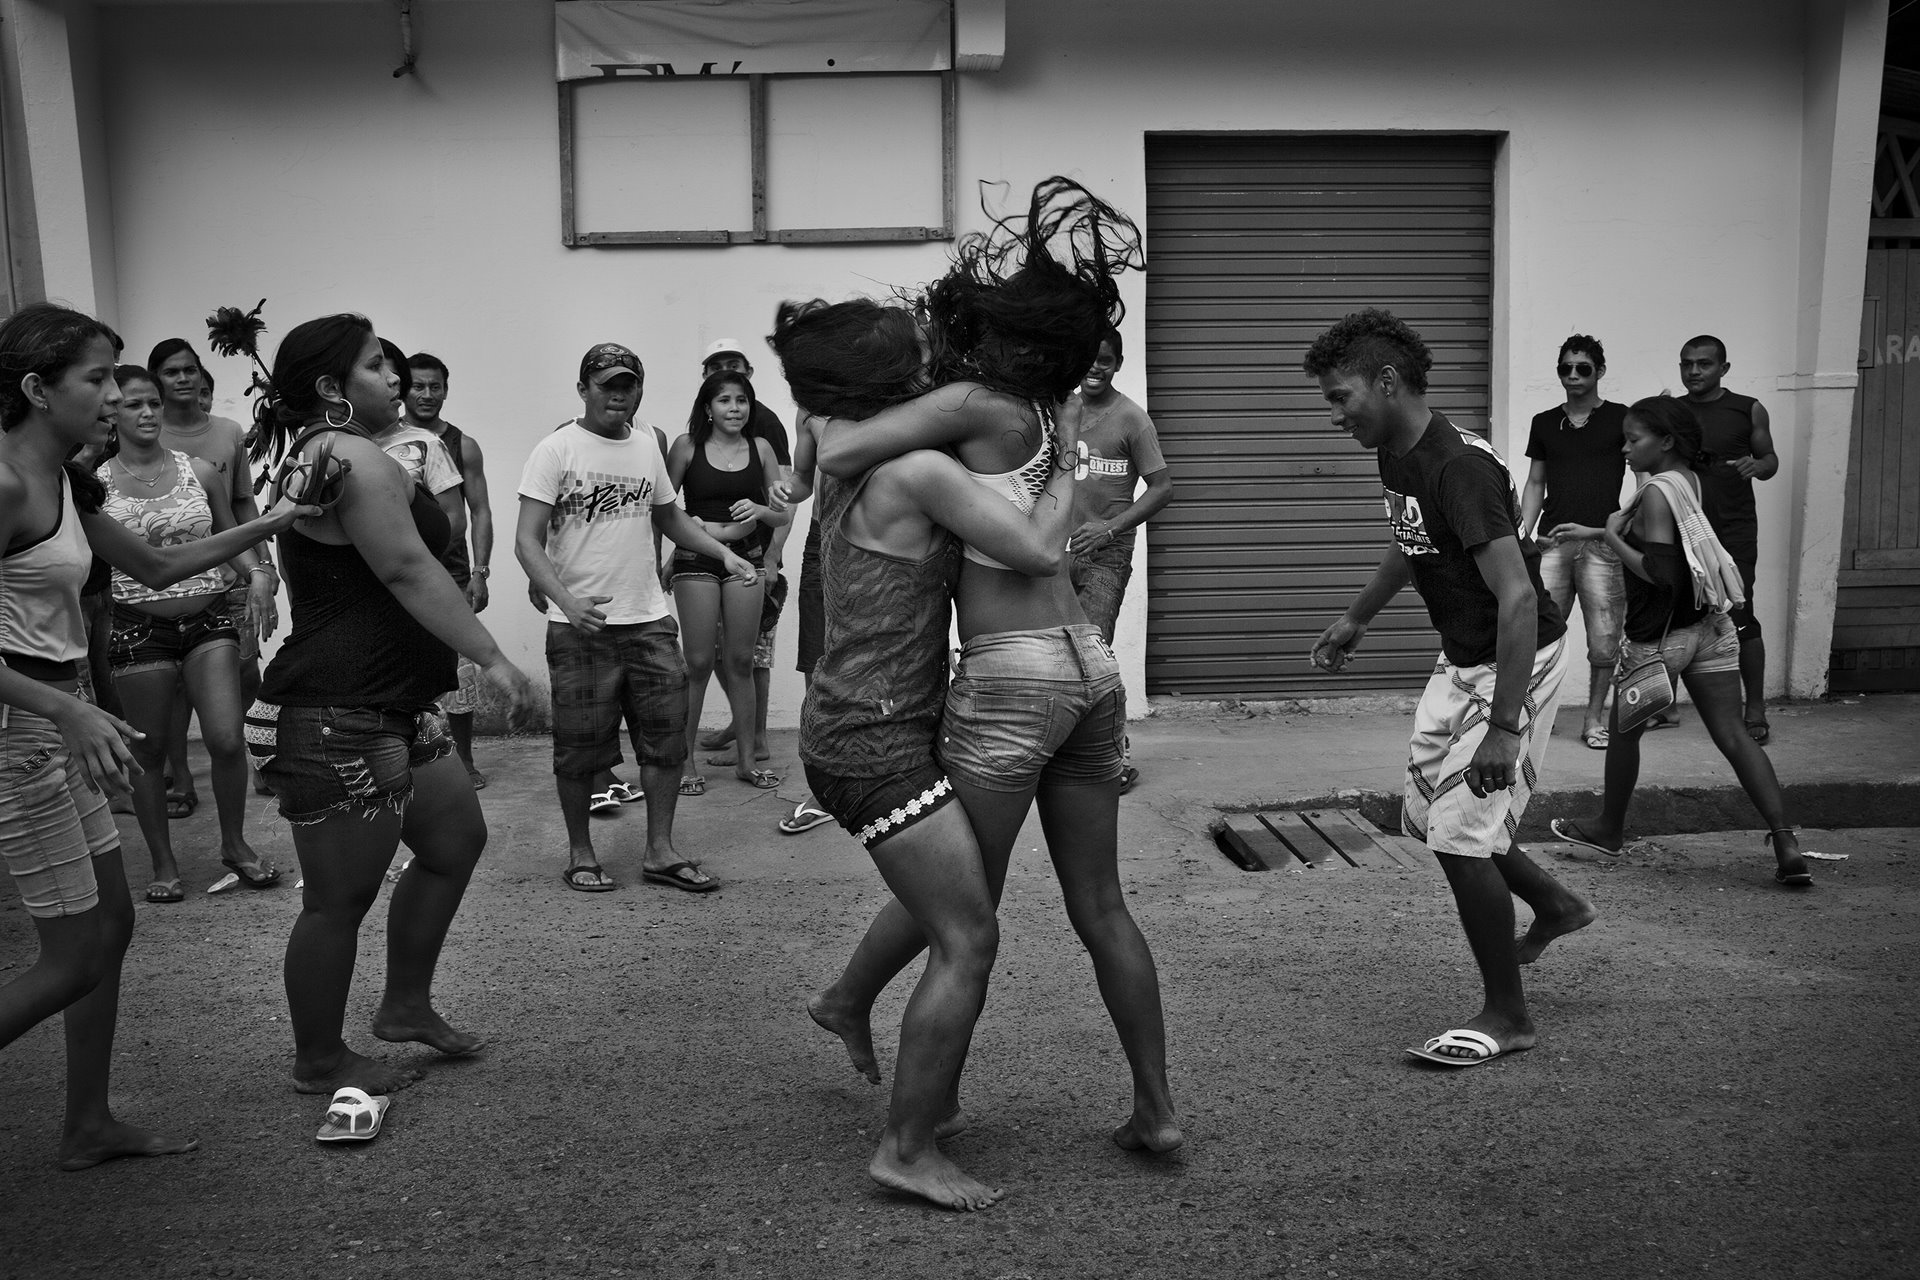 A fight breaks out between two women after a party in the Xingu river bank in Altamira, in Pará, in the Brazilian Amazon. Construction work on the Belo Monte Dam generated a surge of migrant labor to the region. The population of Altamira grew from 100,000 to more than 150,000 in just two years, the vast majority of the increase being single men. Violence increased in the town, which faced a serious housing deficit and inadequate sanitation, as well as social issues such as prostitution.&nbsp;